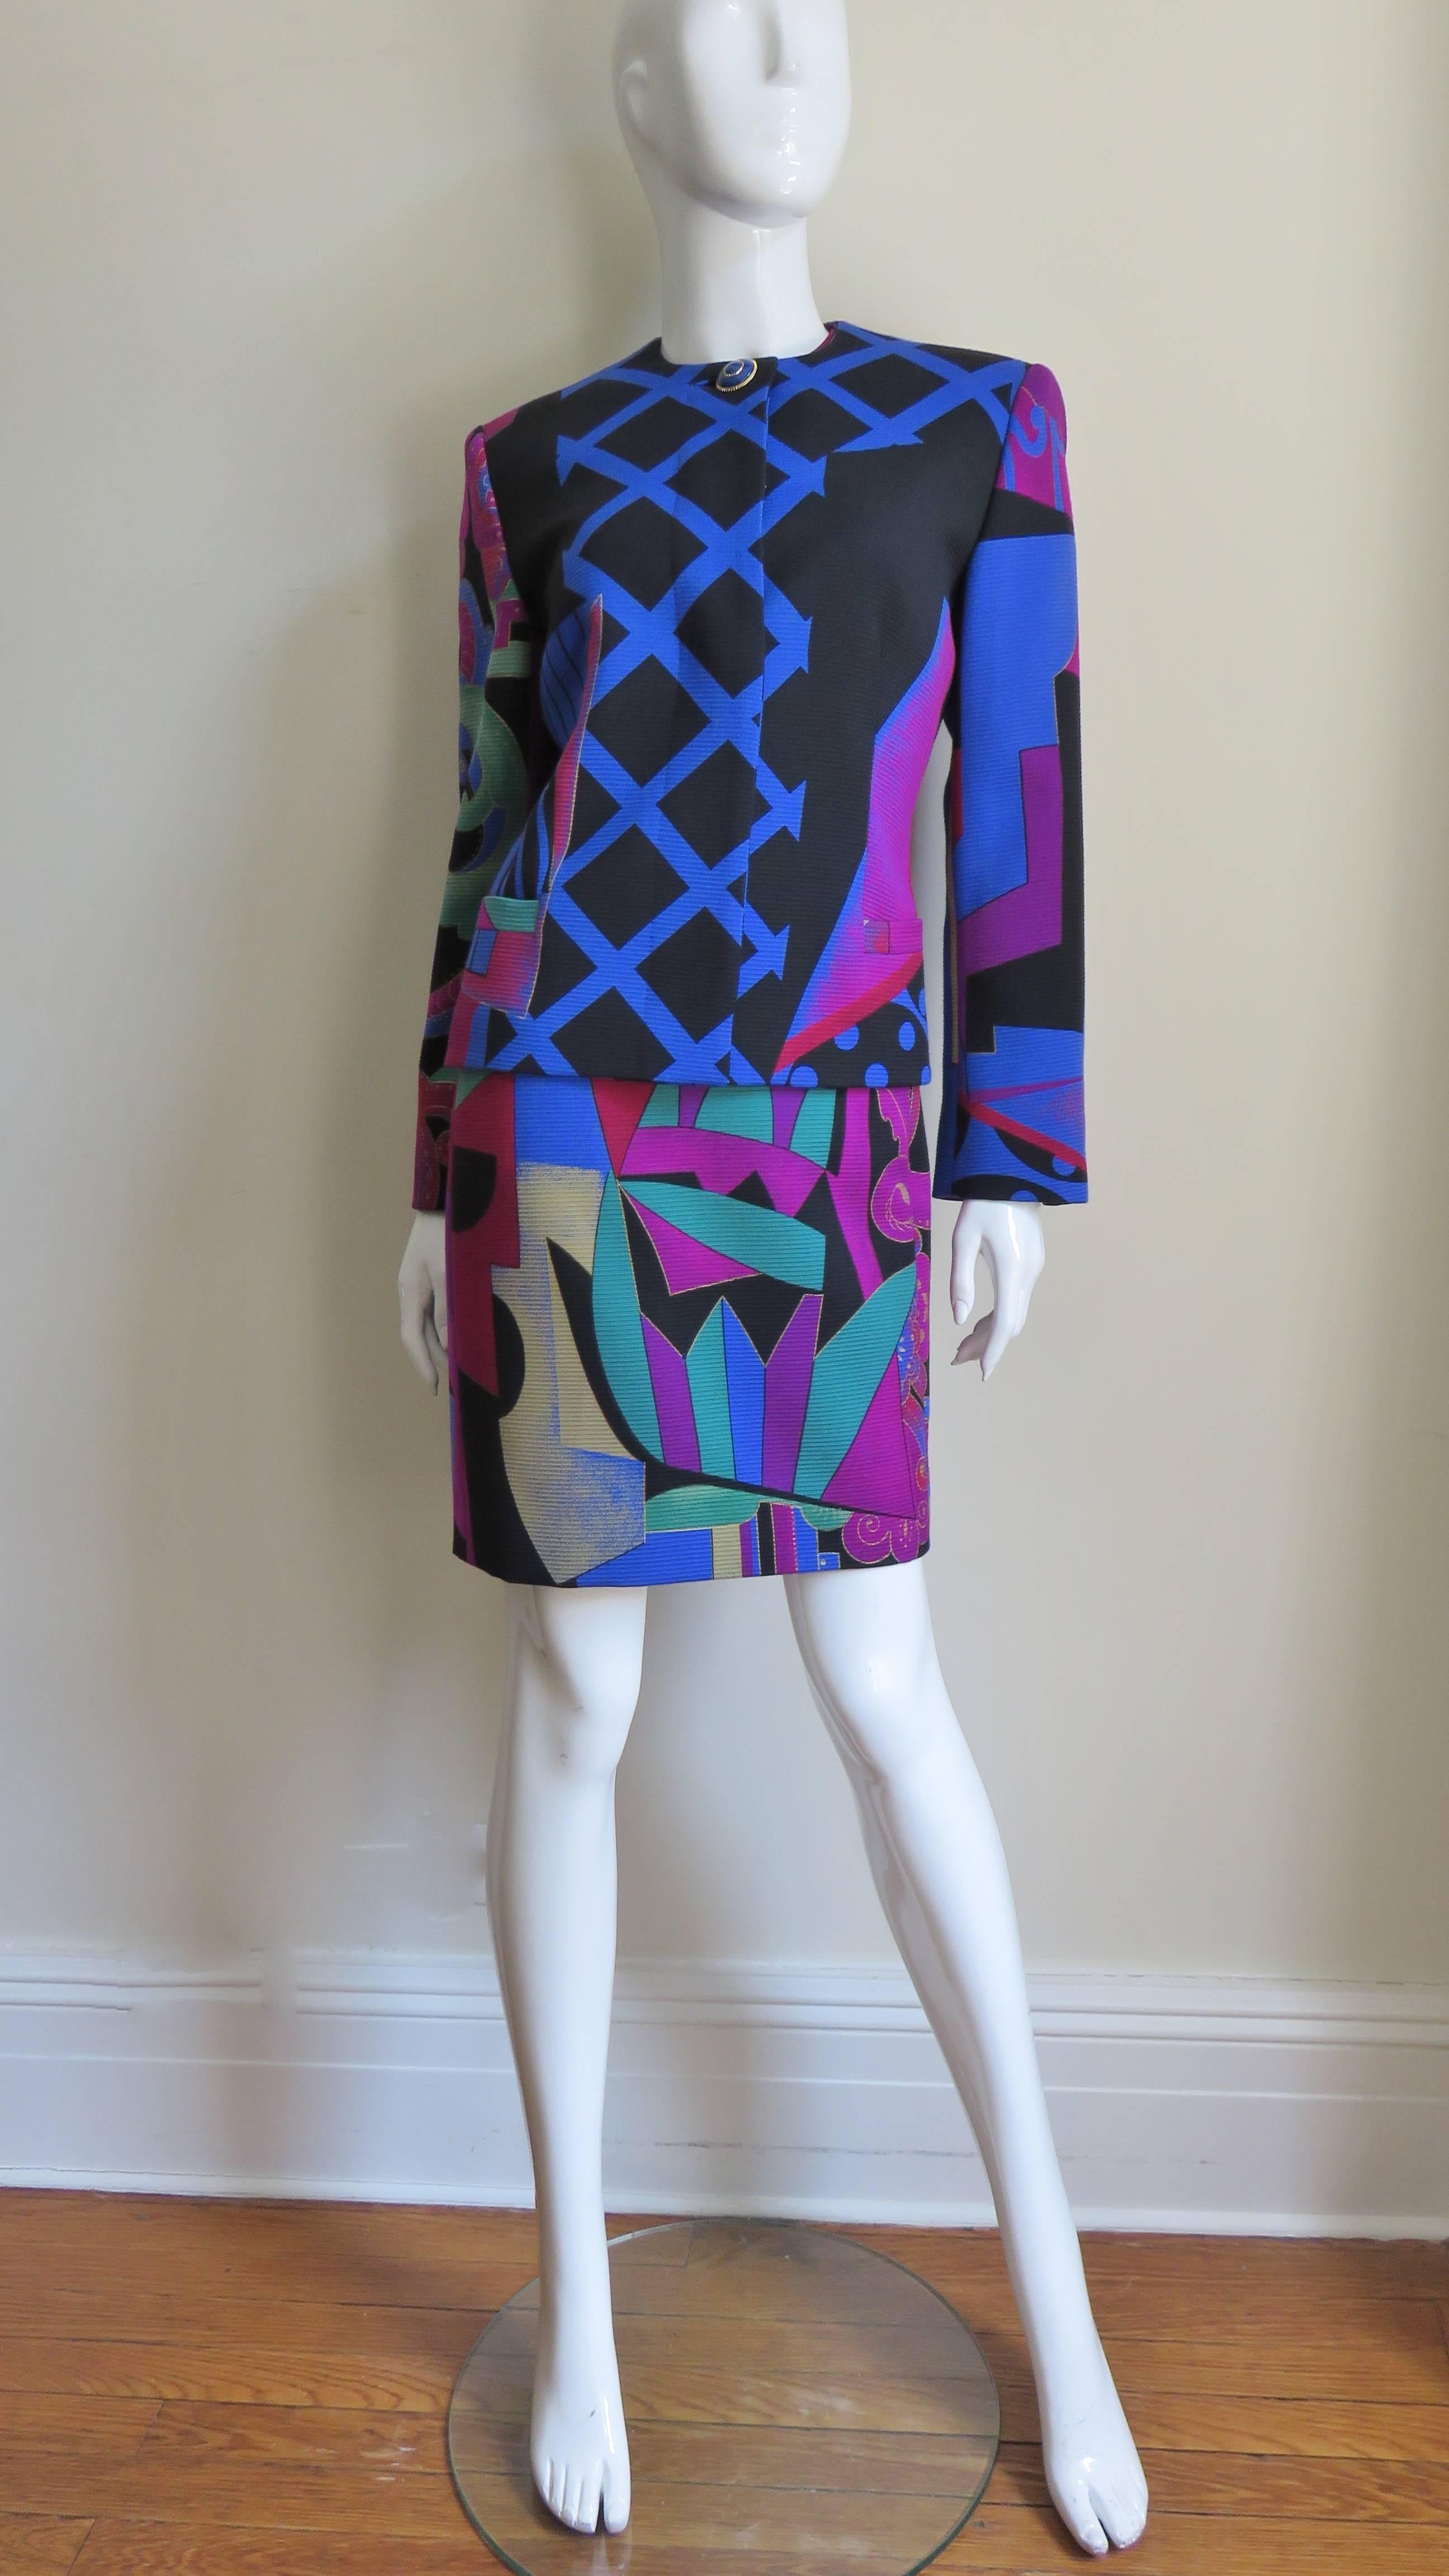 Gianni Versace Graffiti Dress and Jacket A/W 1991 For Sale 2